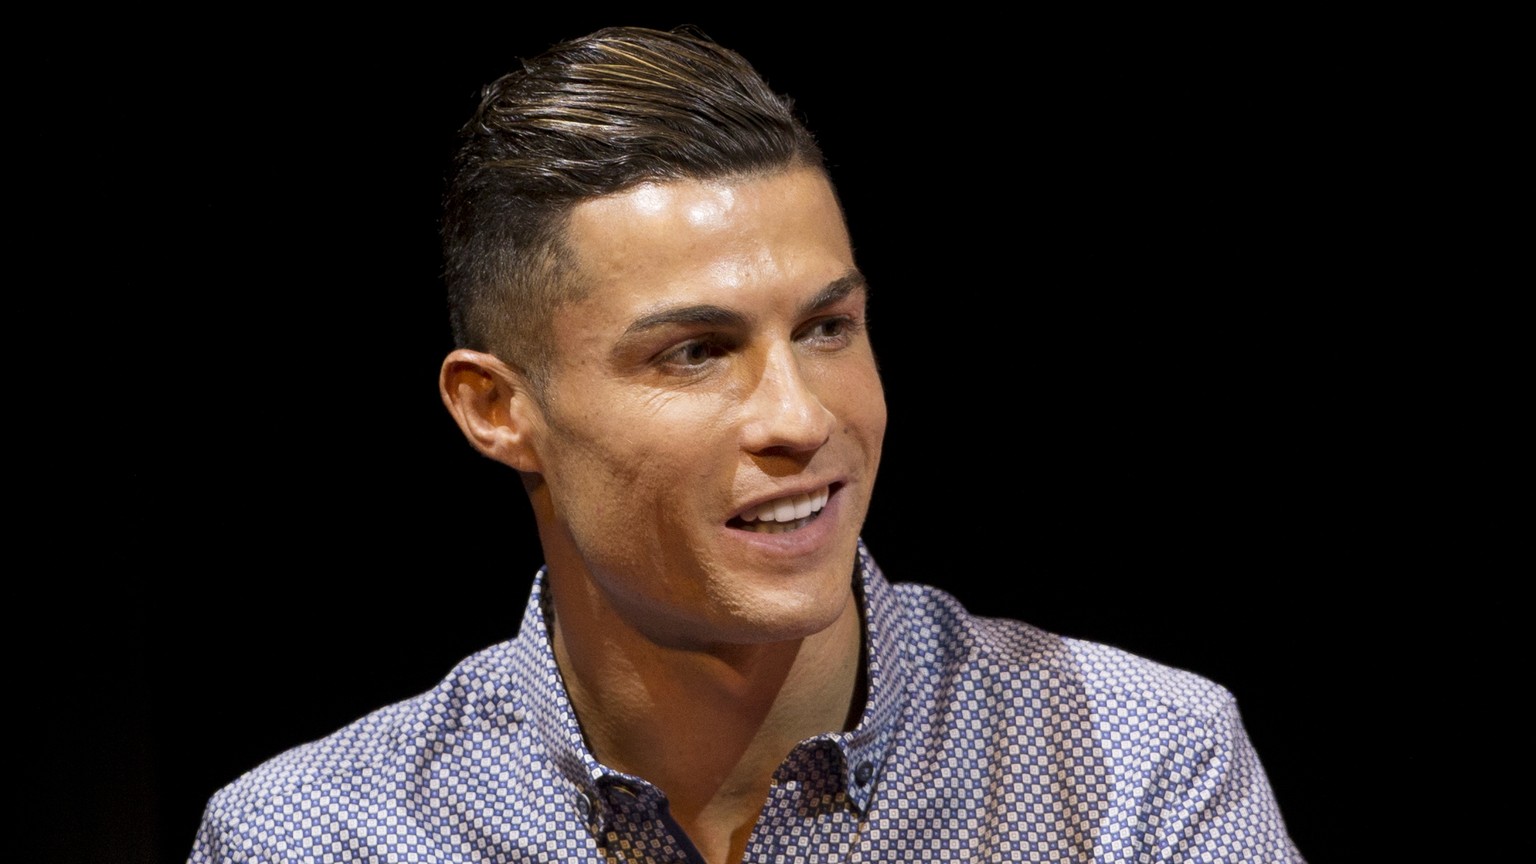 FILE - In this Monday, July 29, 2019 file photo Juventus soccer player Cristiano Ronaldo speaks in Madrid, Spain. Ronaldo's lawyers have filed public court documents following a judge's decision not t ...